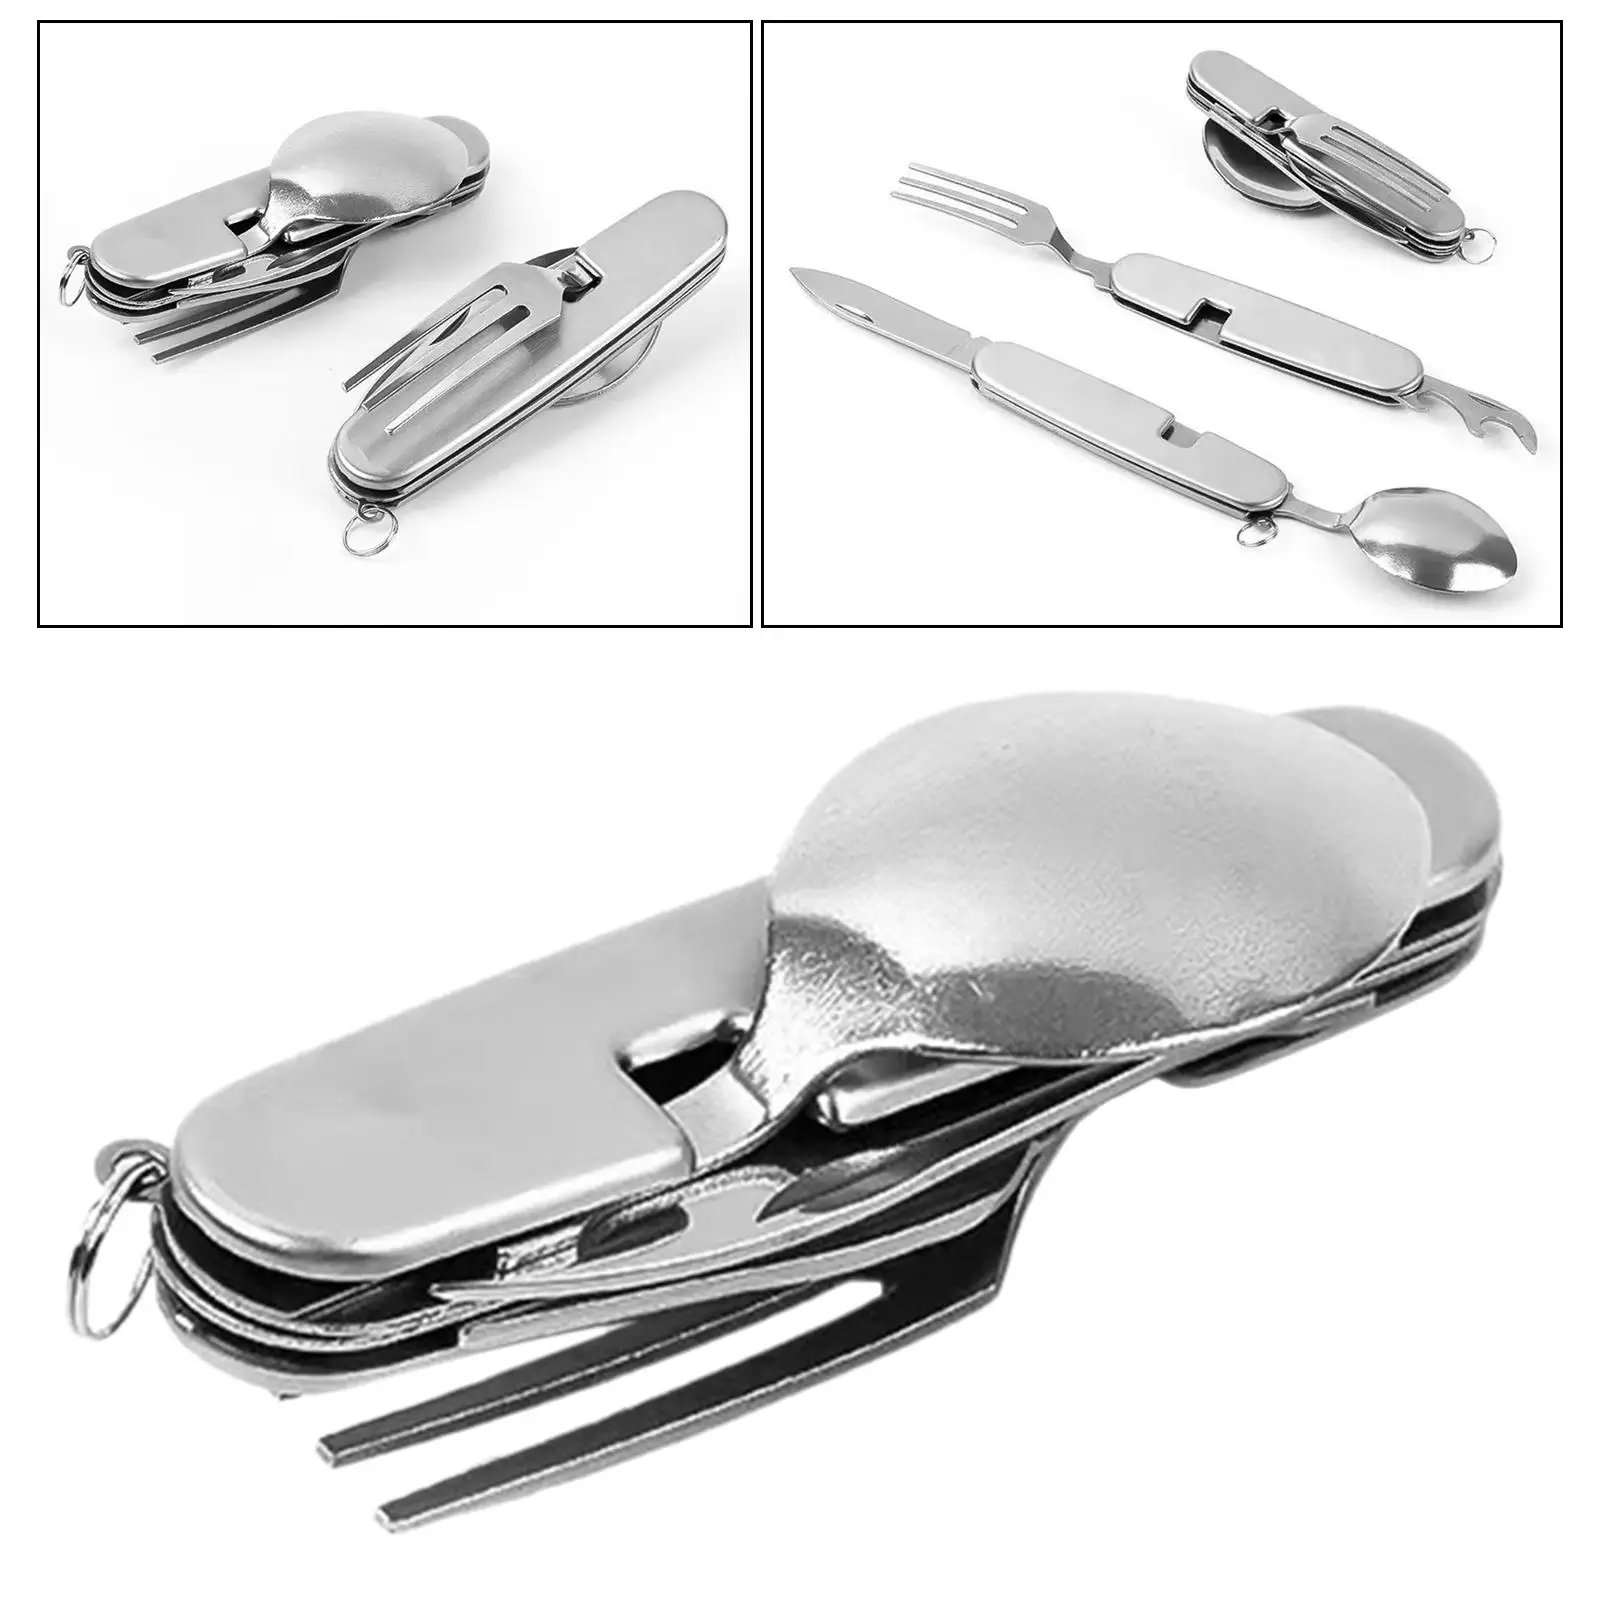 5 in 1 Camping Utensils Foldable Compact Multifunctional Tableware Camping Cutlery for Picnic Kitchen Home Cooking Outdoor